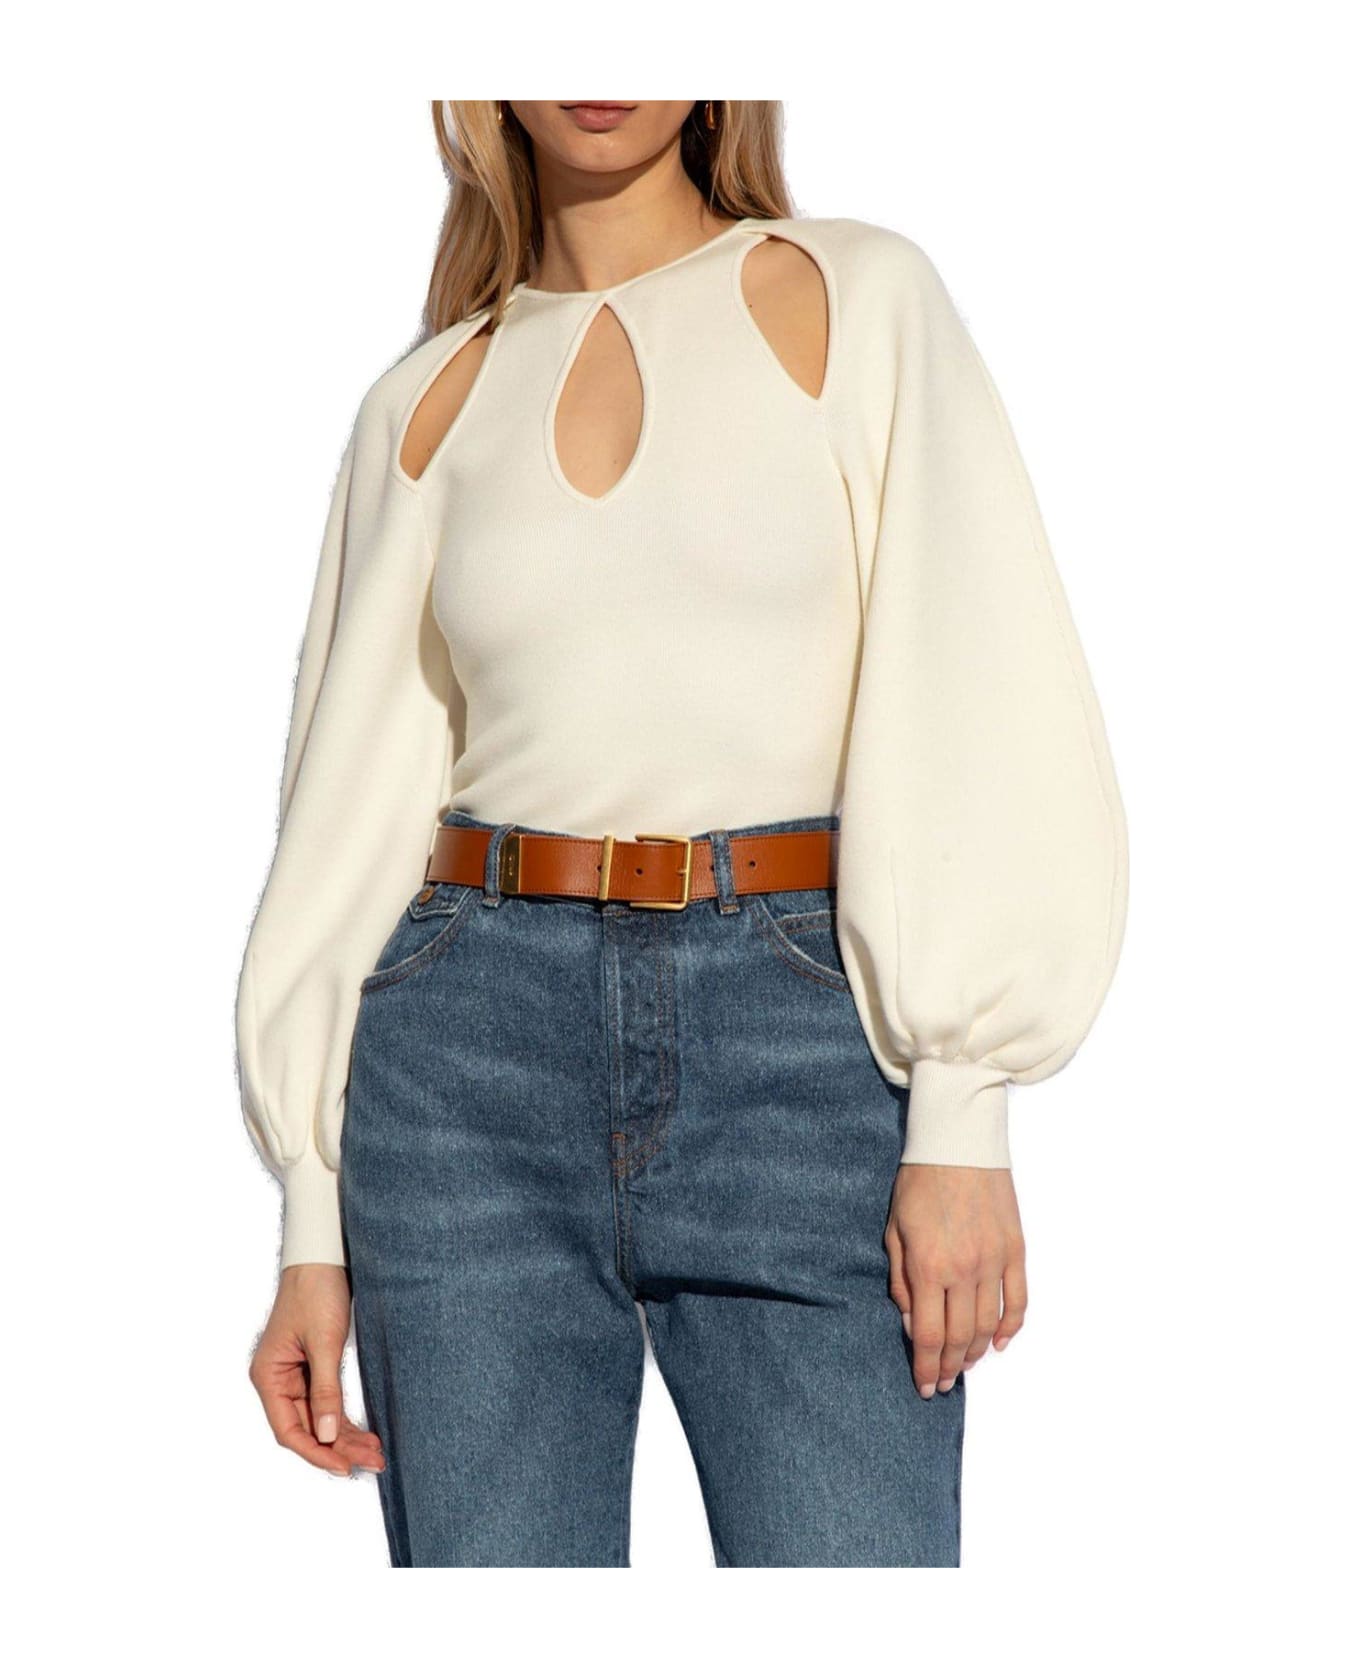 Chloé Puff-sleeved Cut-out Knit Top - Iconic milk ブラウス